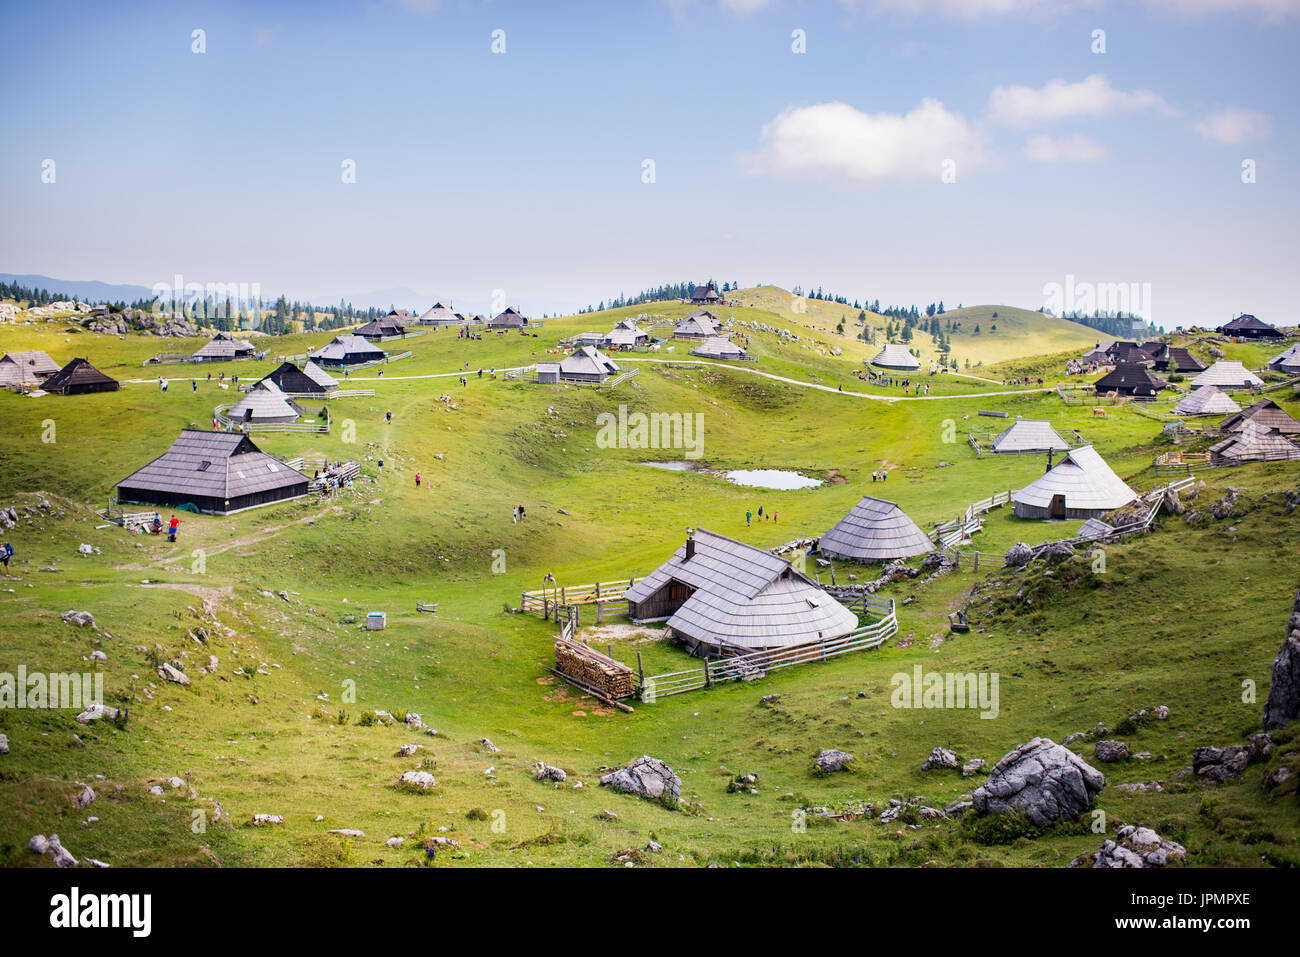 Velika planina plateau, Slovenia, Mountain village in Alps, wooden houses in traditional style, popular hiking destination Stock Photo